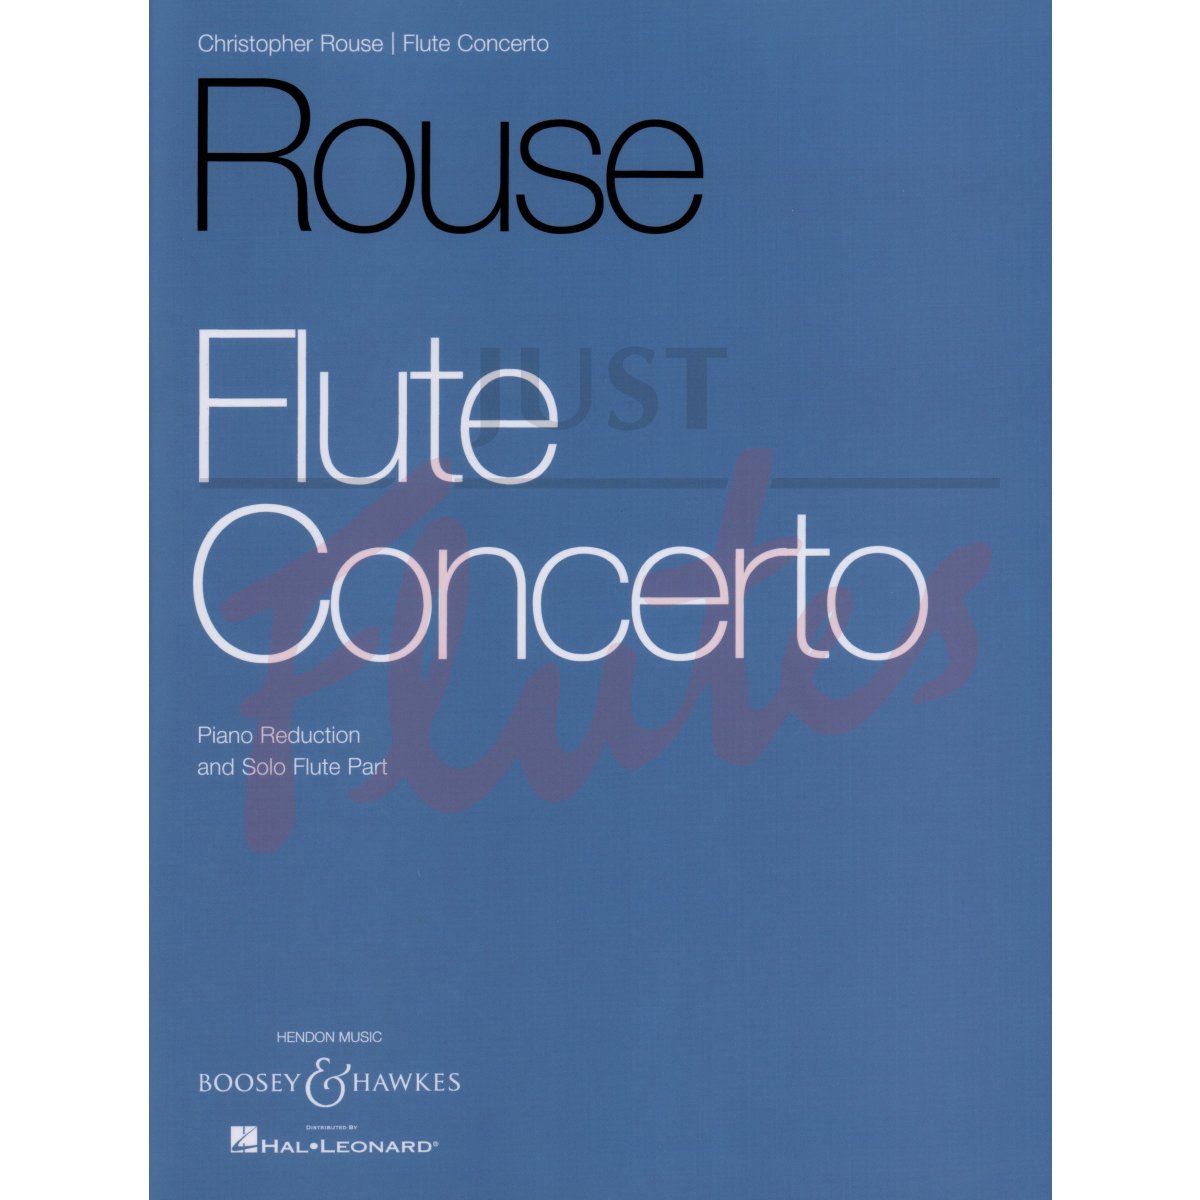 Flute Concerto for Flute and Piano